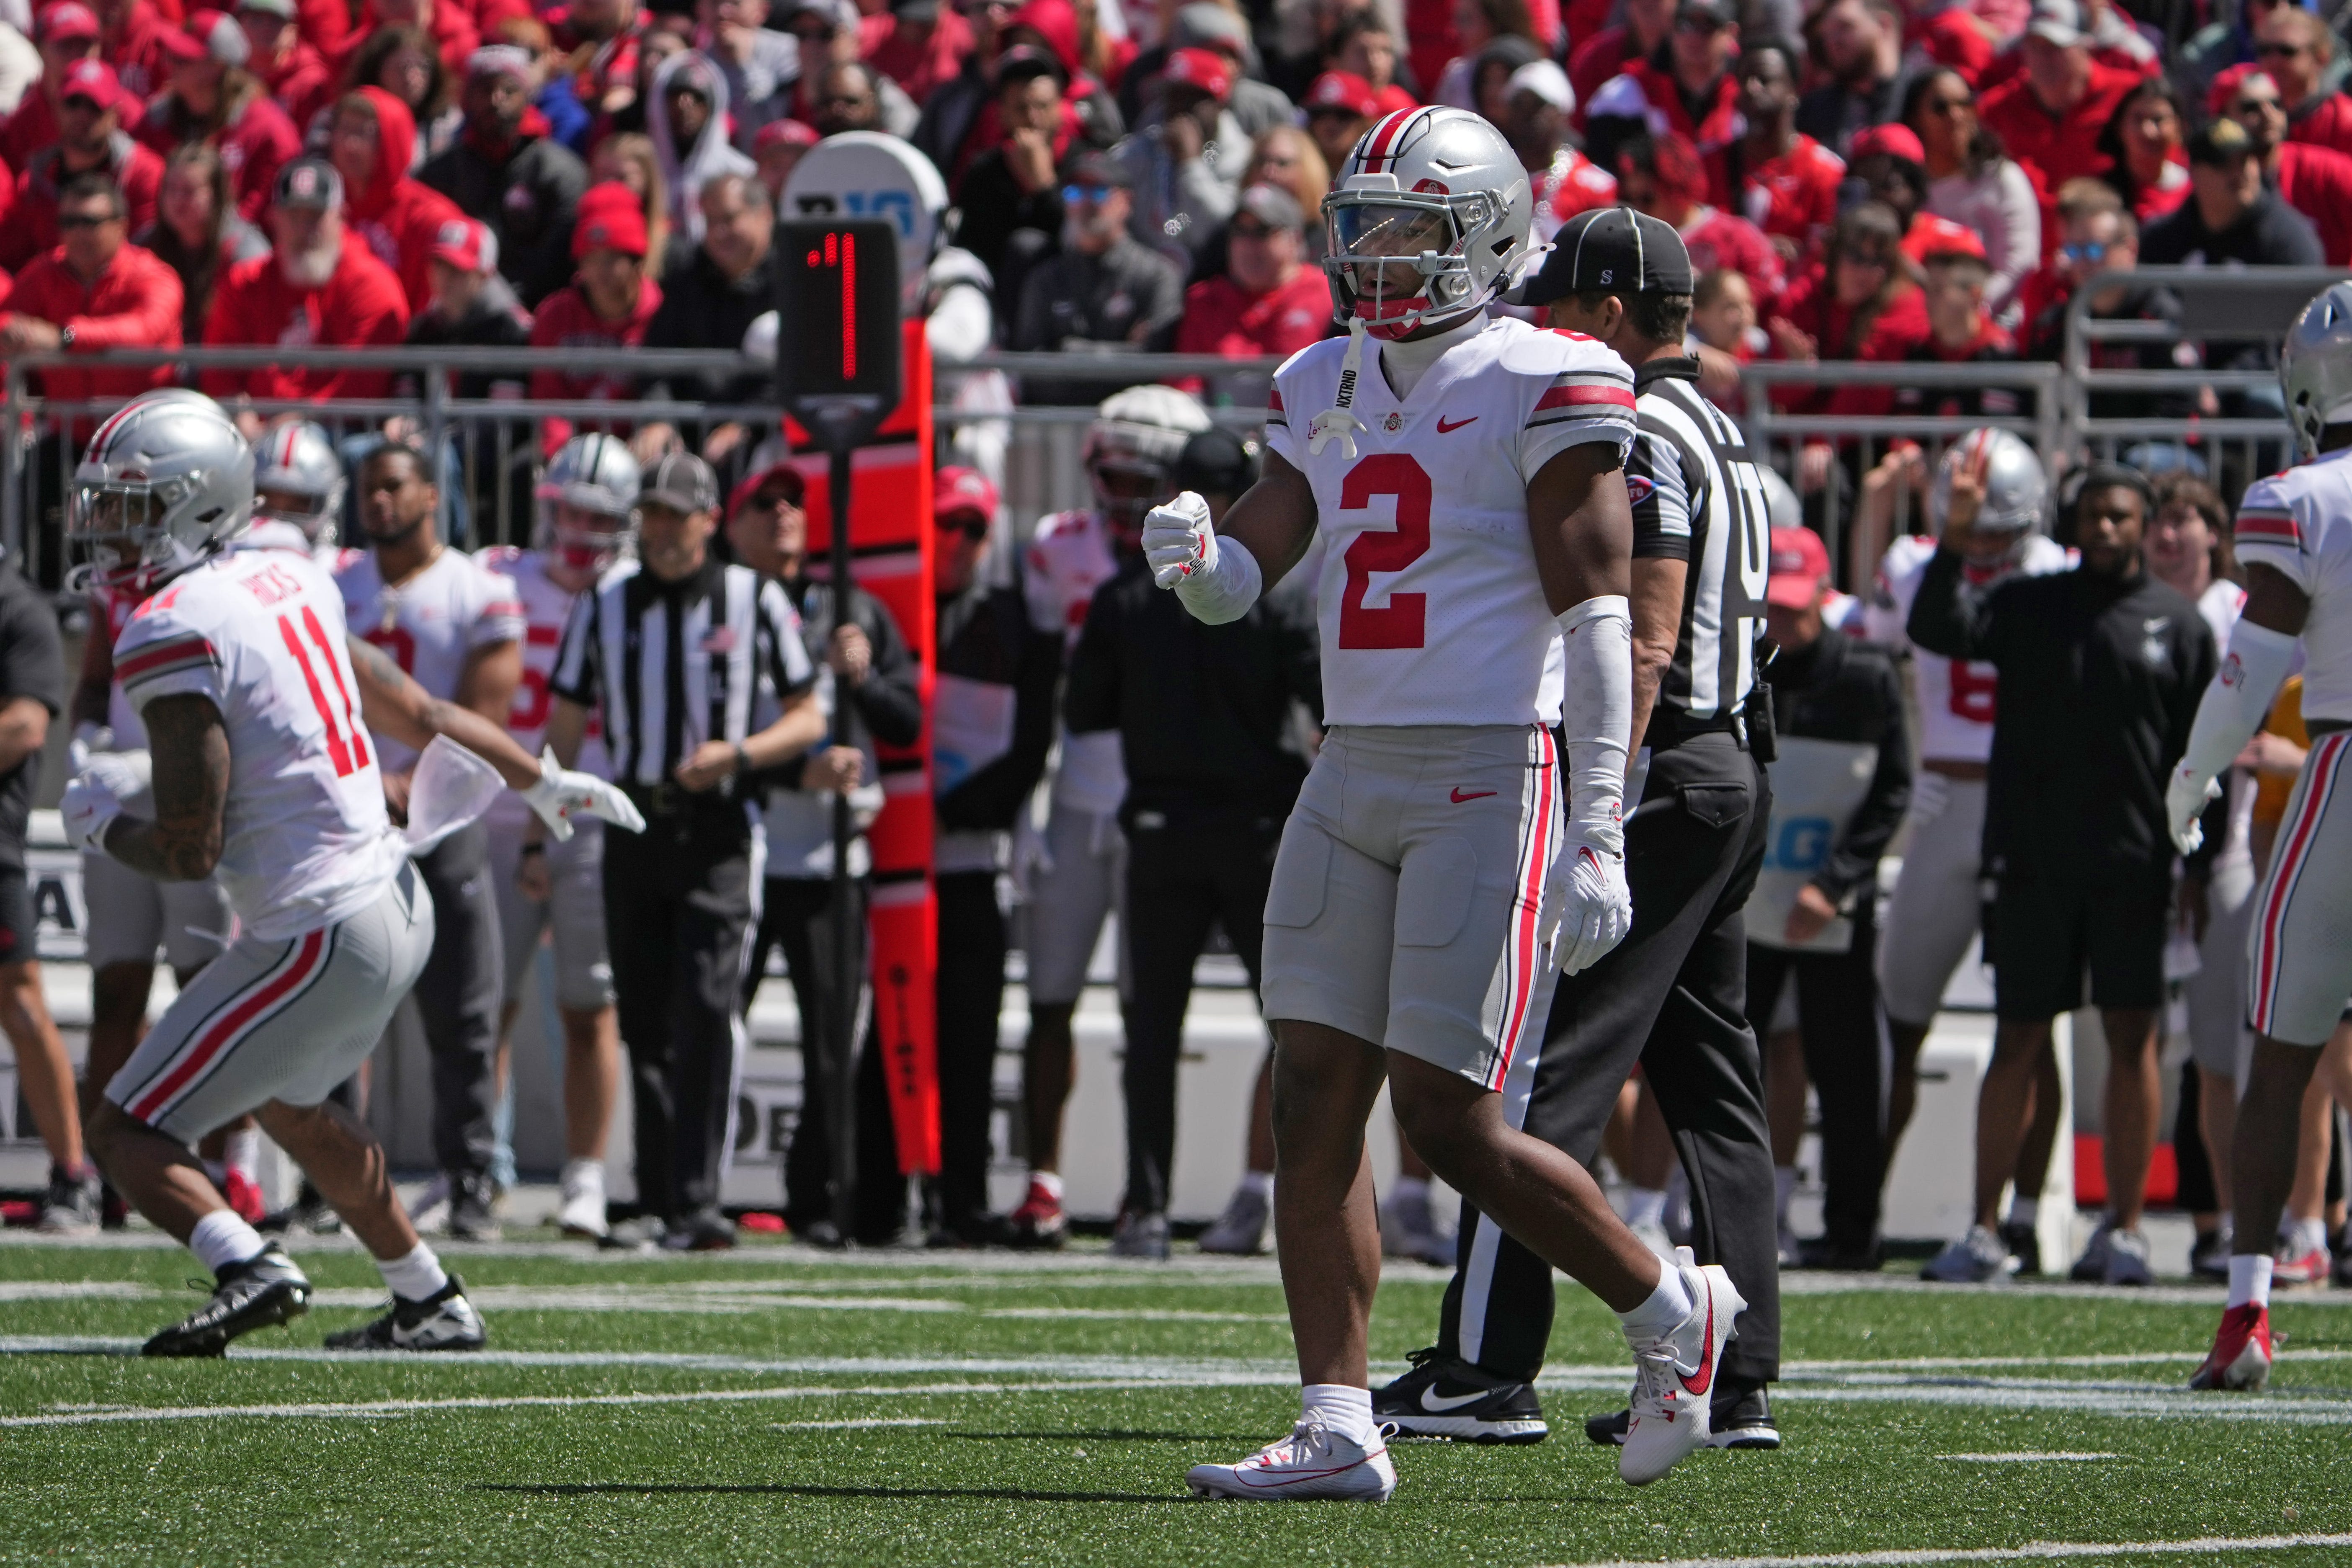 10 intriguing Ohio State football players to watch at the Buckeyes' preseason training camp